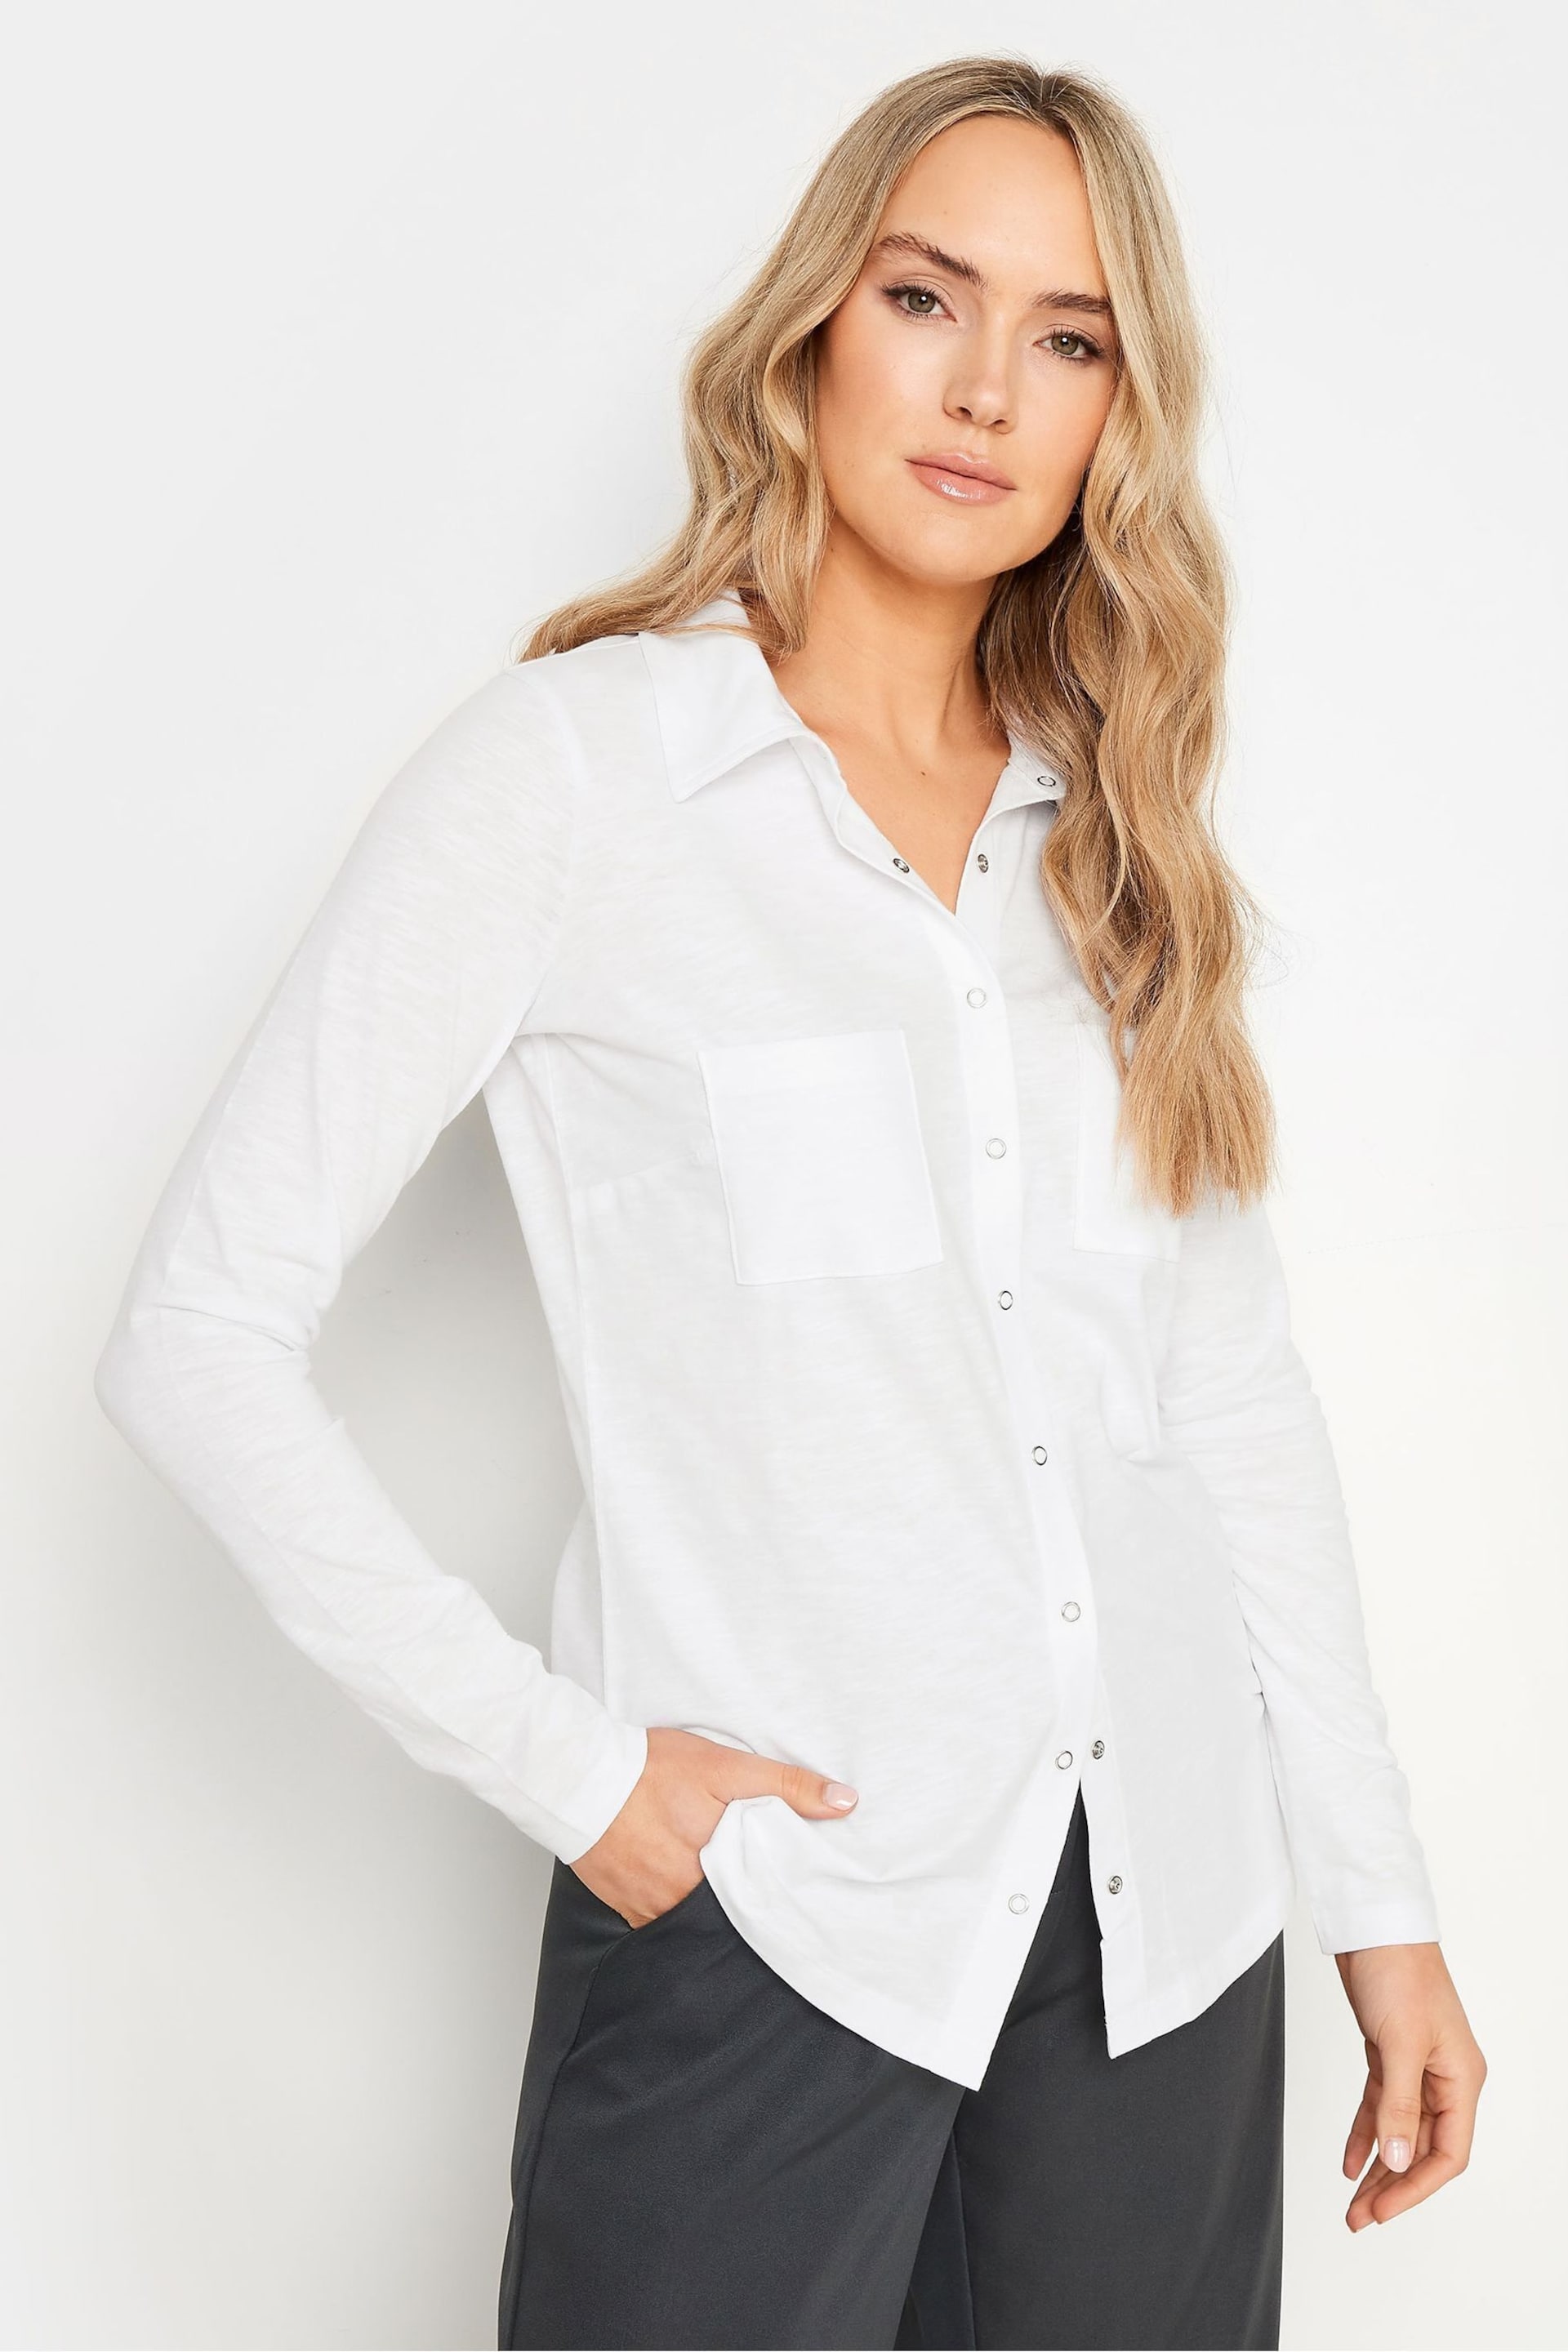 Long Tall Sally White Cotton Jersey Shirt - Image 4 of 4